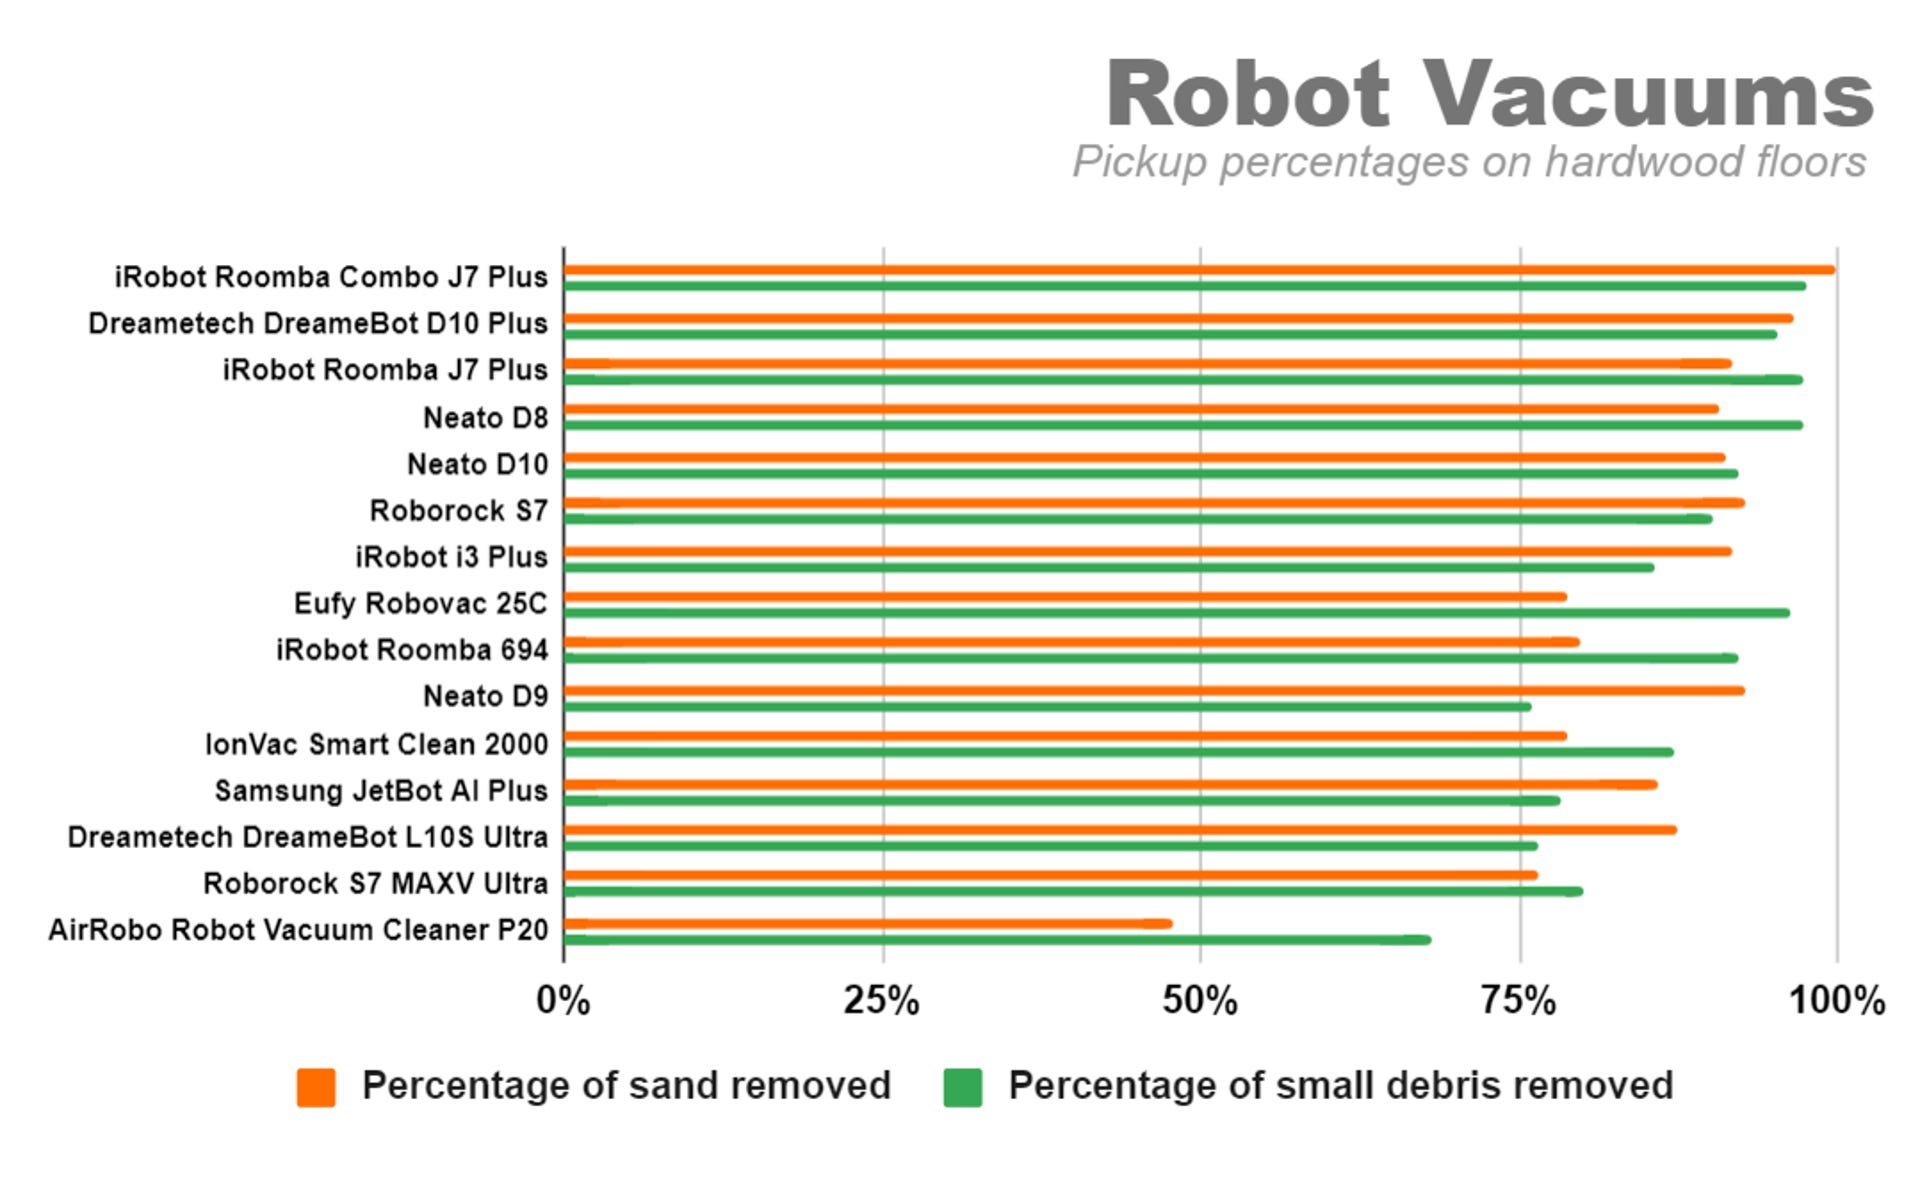 A bar graph ranks robot vacuums by their pickup percentages for sand and small debris on hardwood floors. The iRobot Roomba Combo J7 Plus sits in first place among fifteen cleaners, followed by the Dreametech DreameBot D10 Plus and the iRobot Roomba J7 Plus.